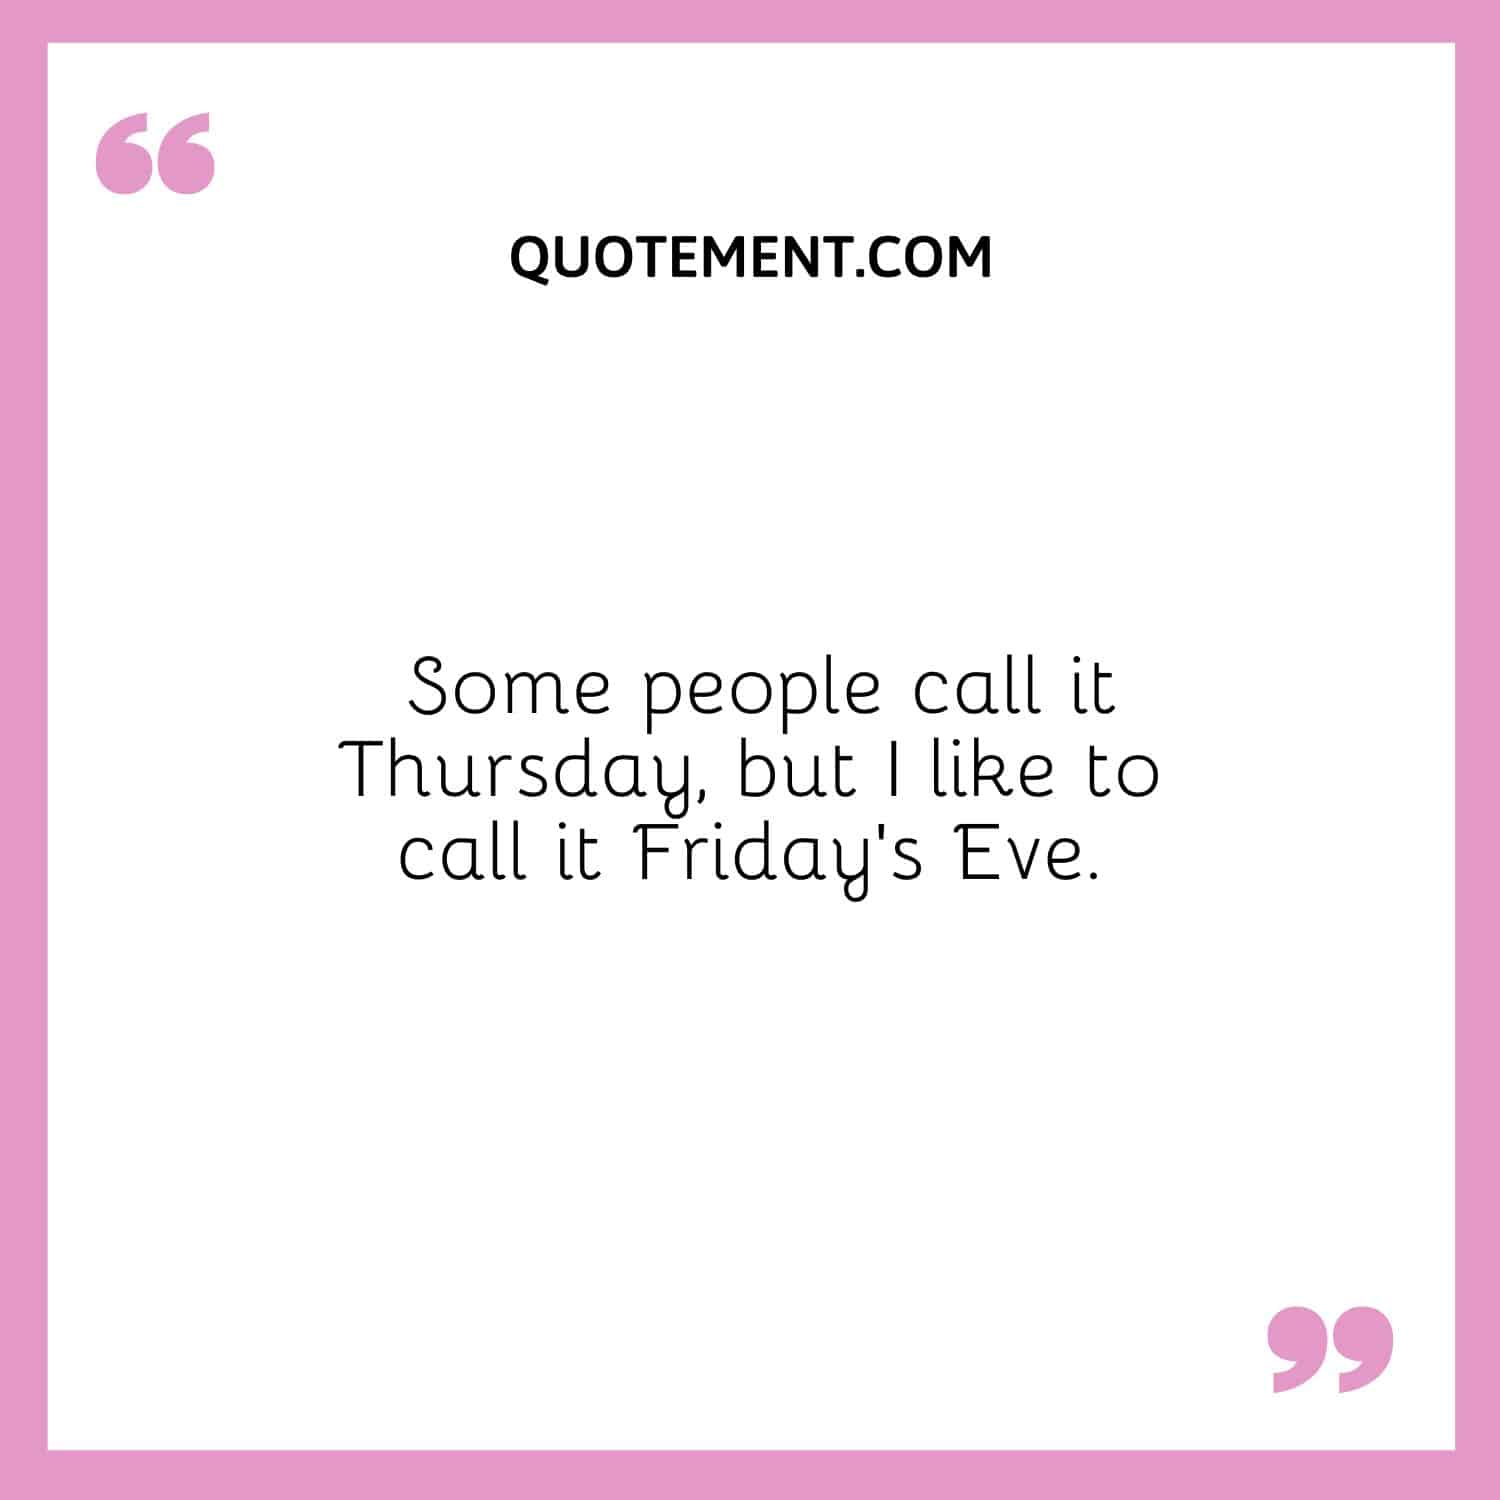 Some people call it Thursday, but I like to call it Friday’s Eve